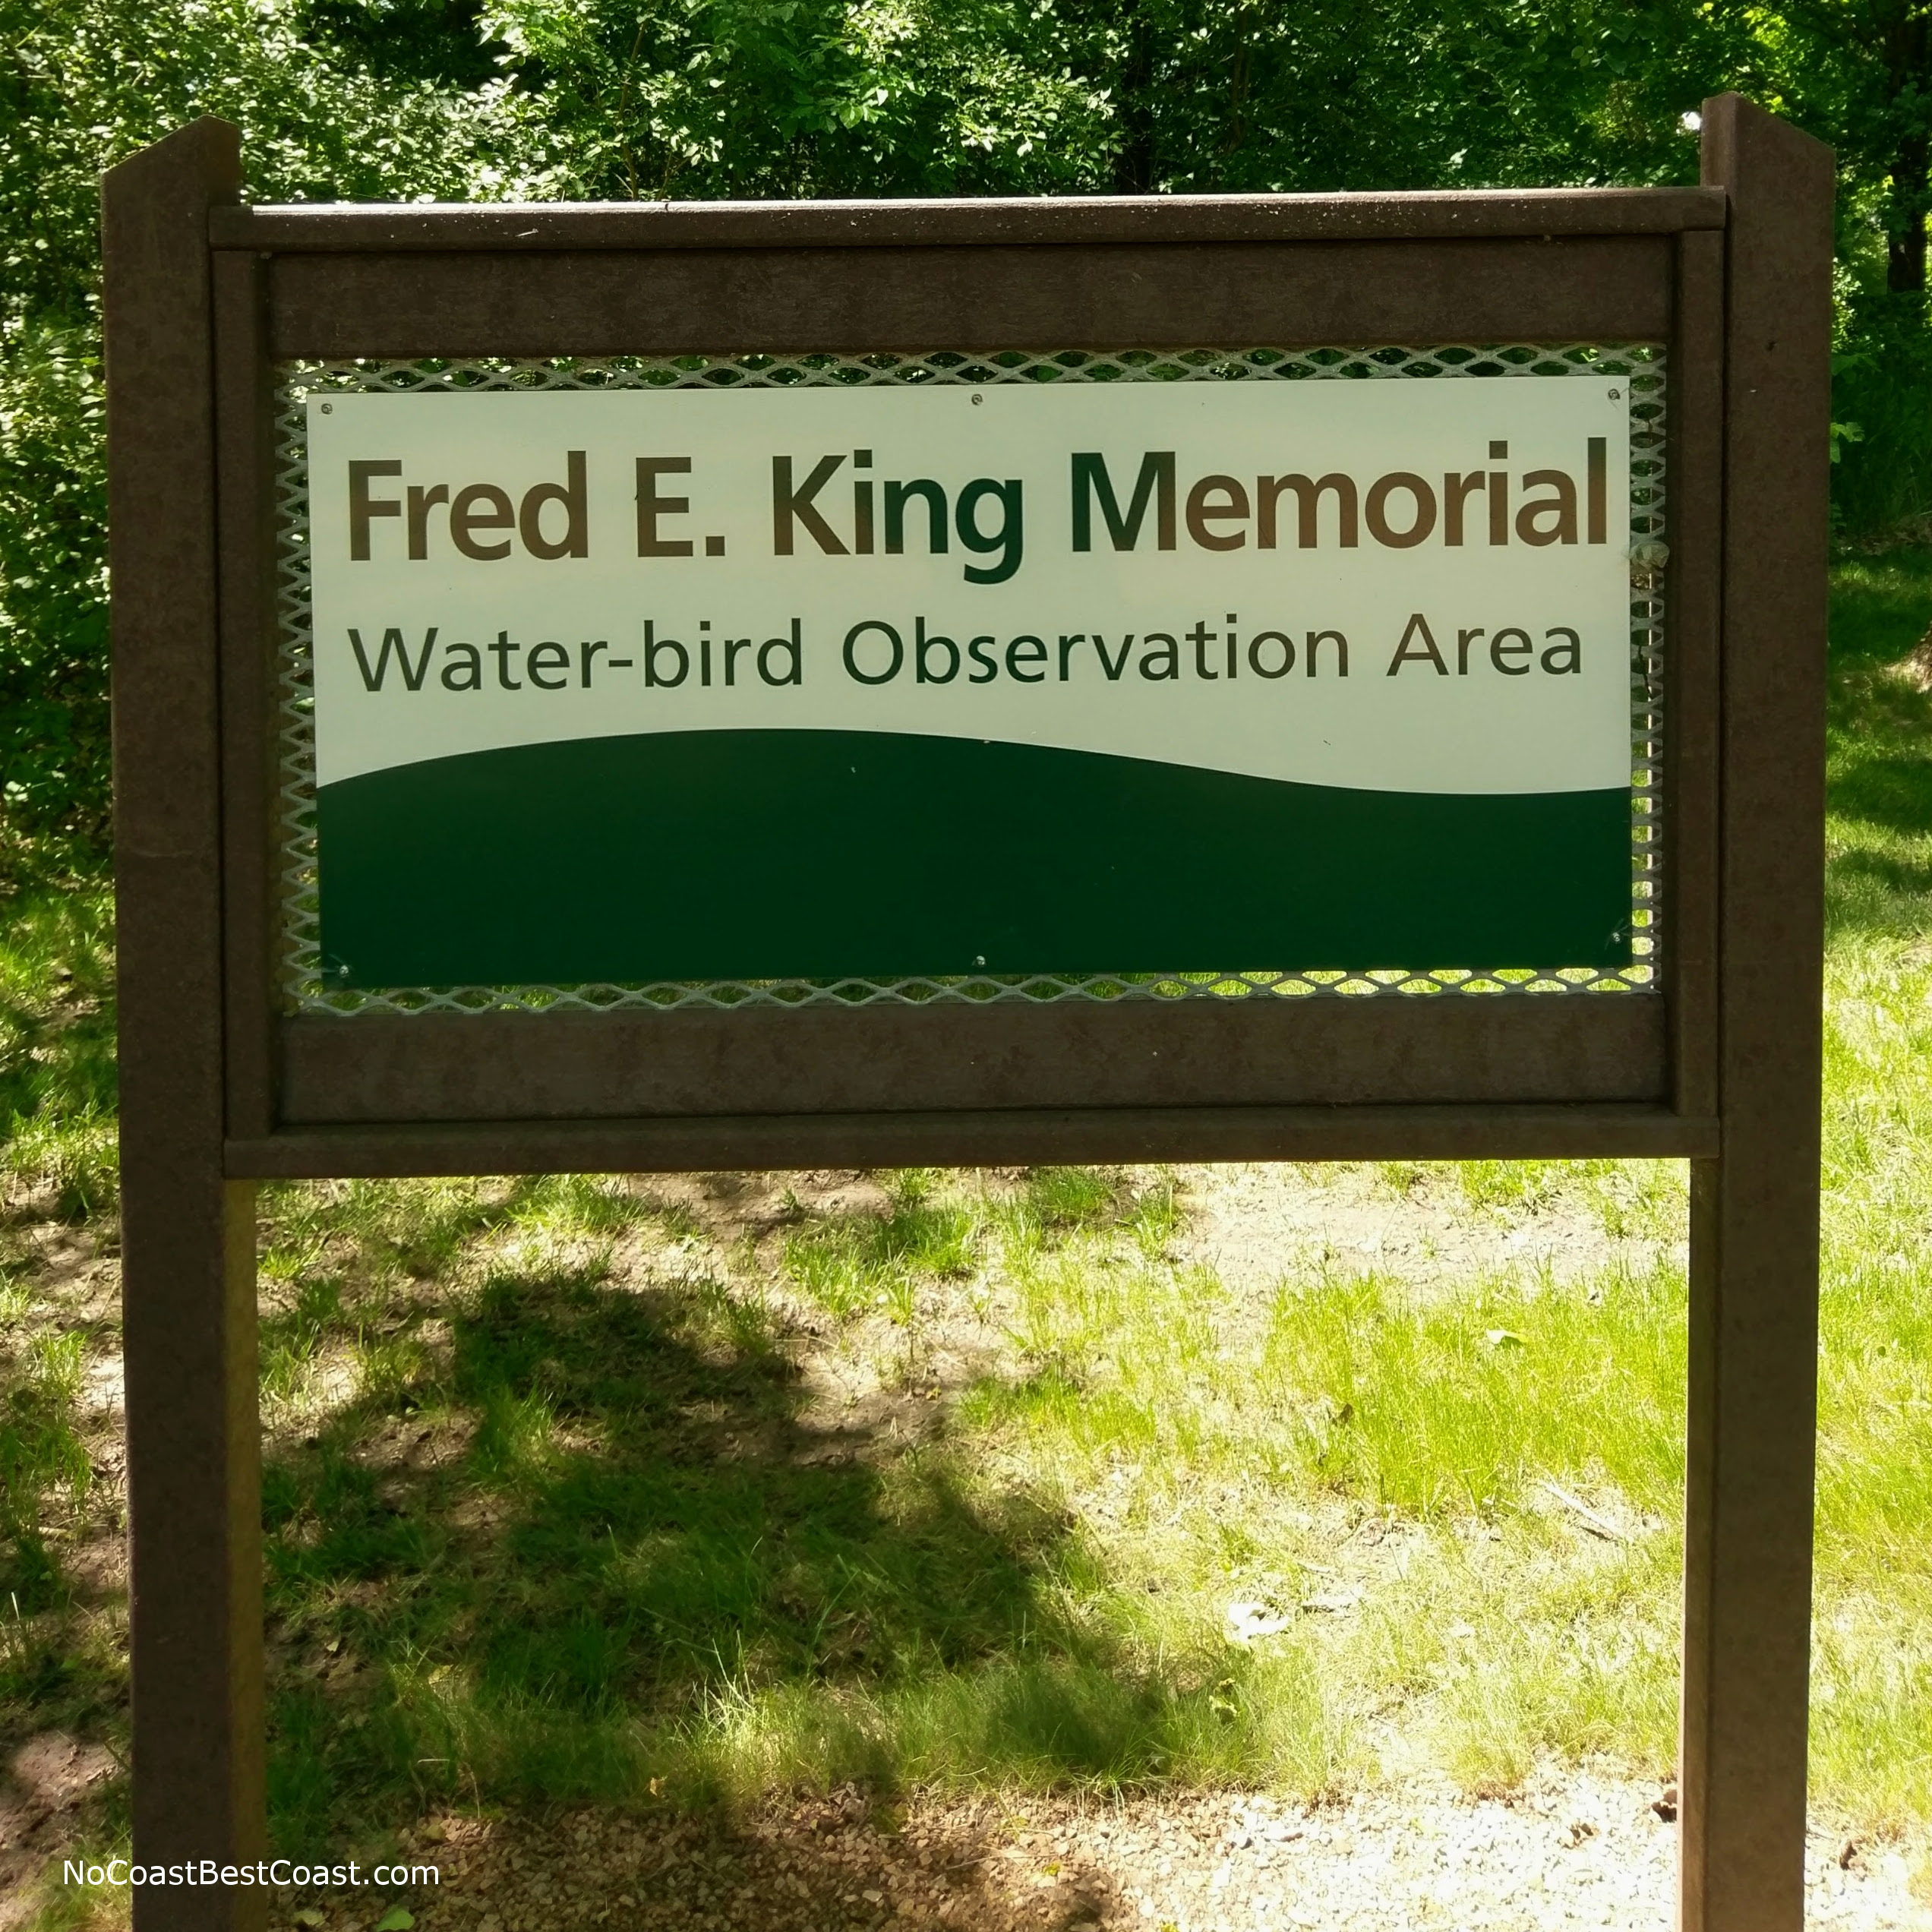 The Fred E. King Memorial Water-bird Observation Area